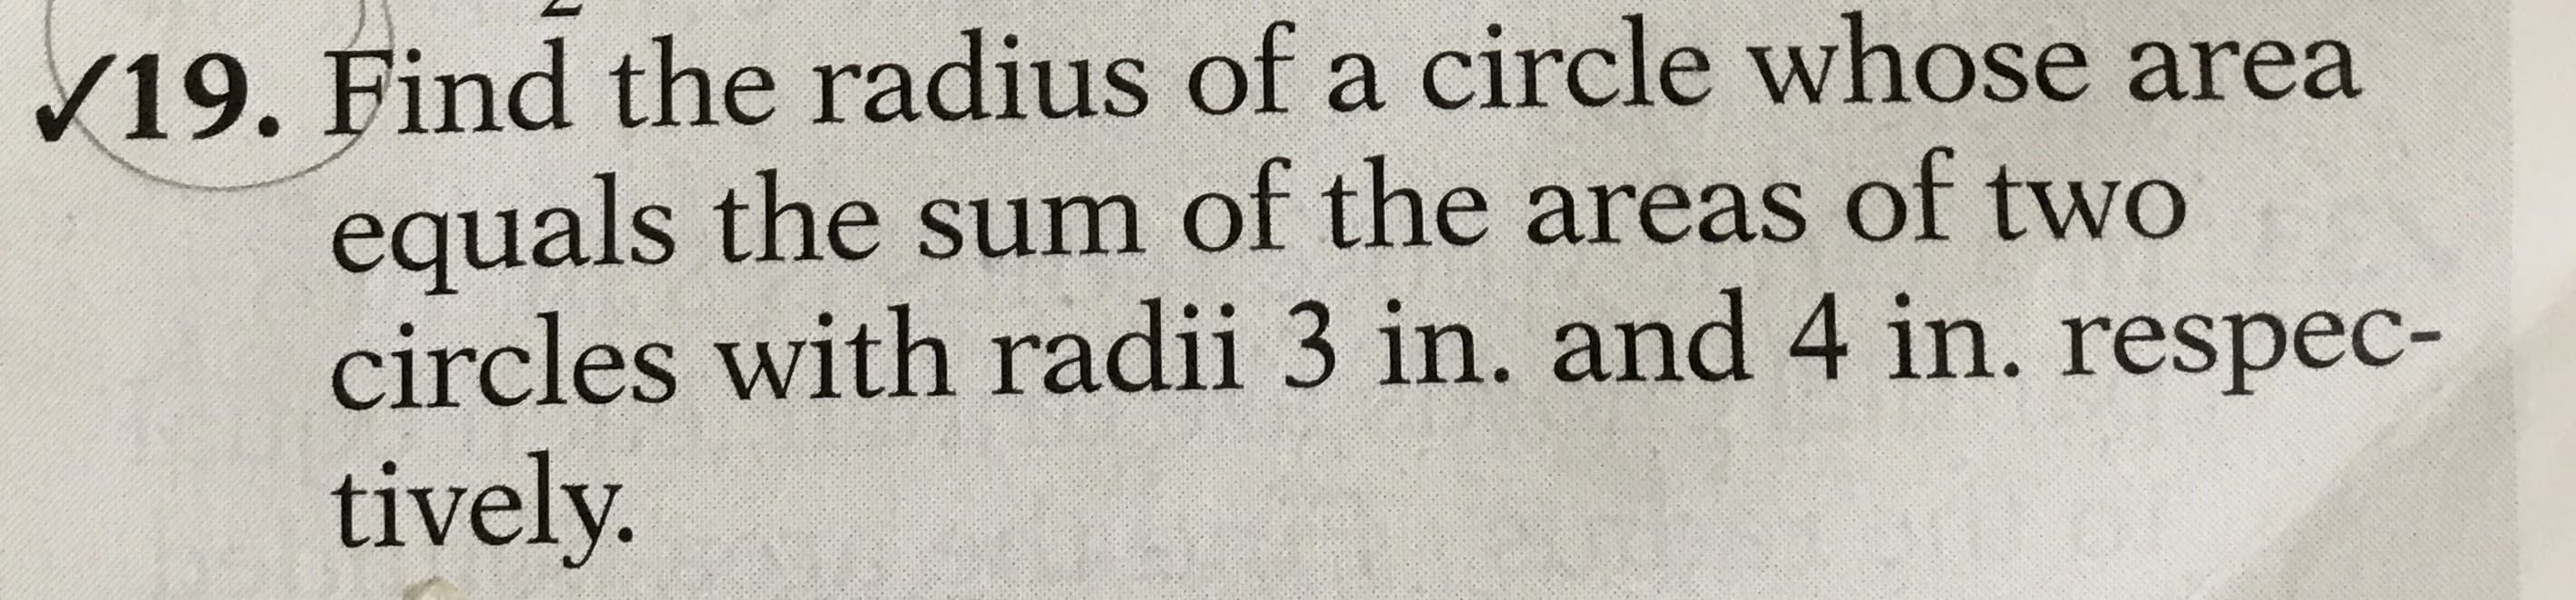 Find the radius of a circle whose area
equals the sum of the areas of two
circles with radii 3 in. and 4 in. respec-
tively.
